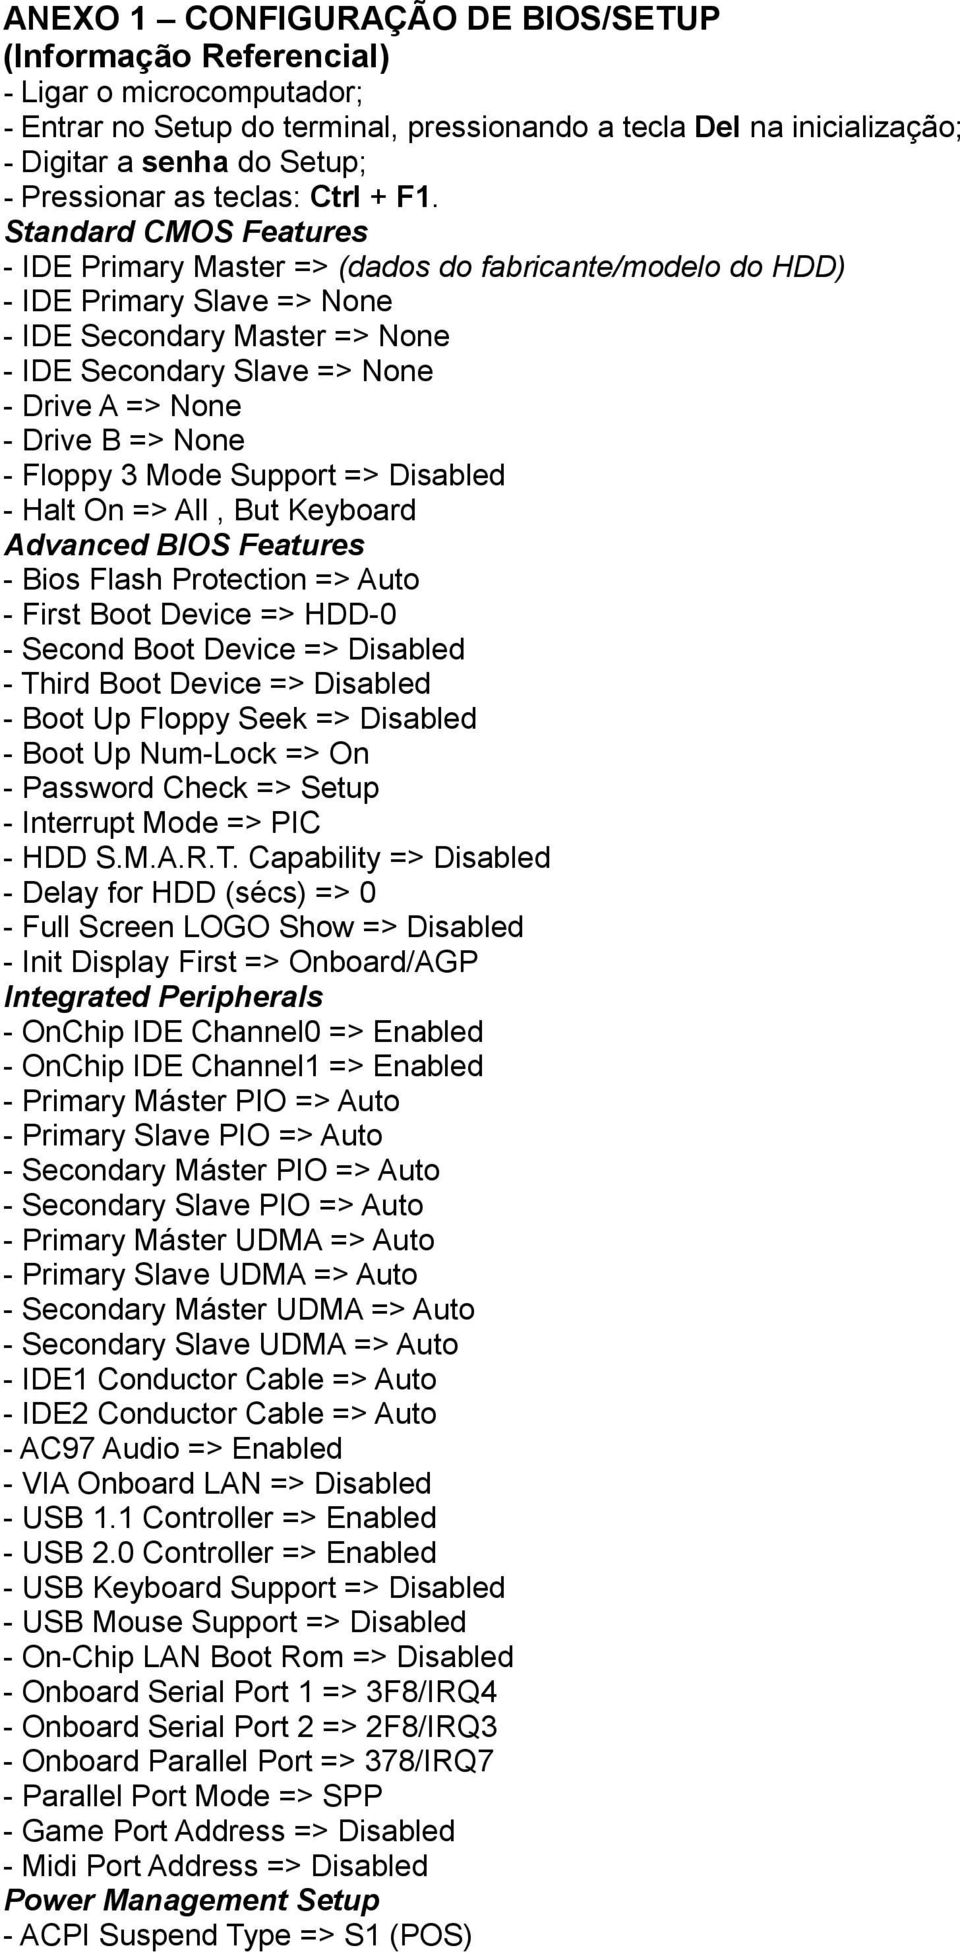 Standard CMOS Features - IDE Primary Master => (dados do fabricante/modelo do HDD) - IDE Primary Slave => None - IDE Secondary Master => None - IDE Secondary Slave => None - Drive A => None - Drive B